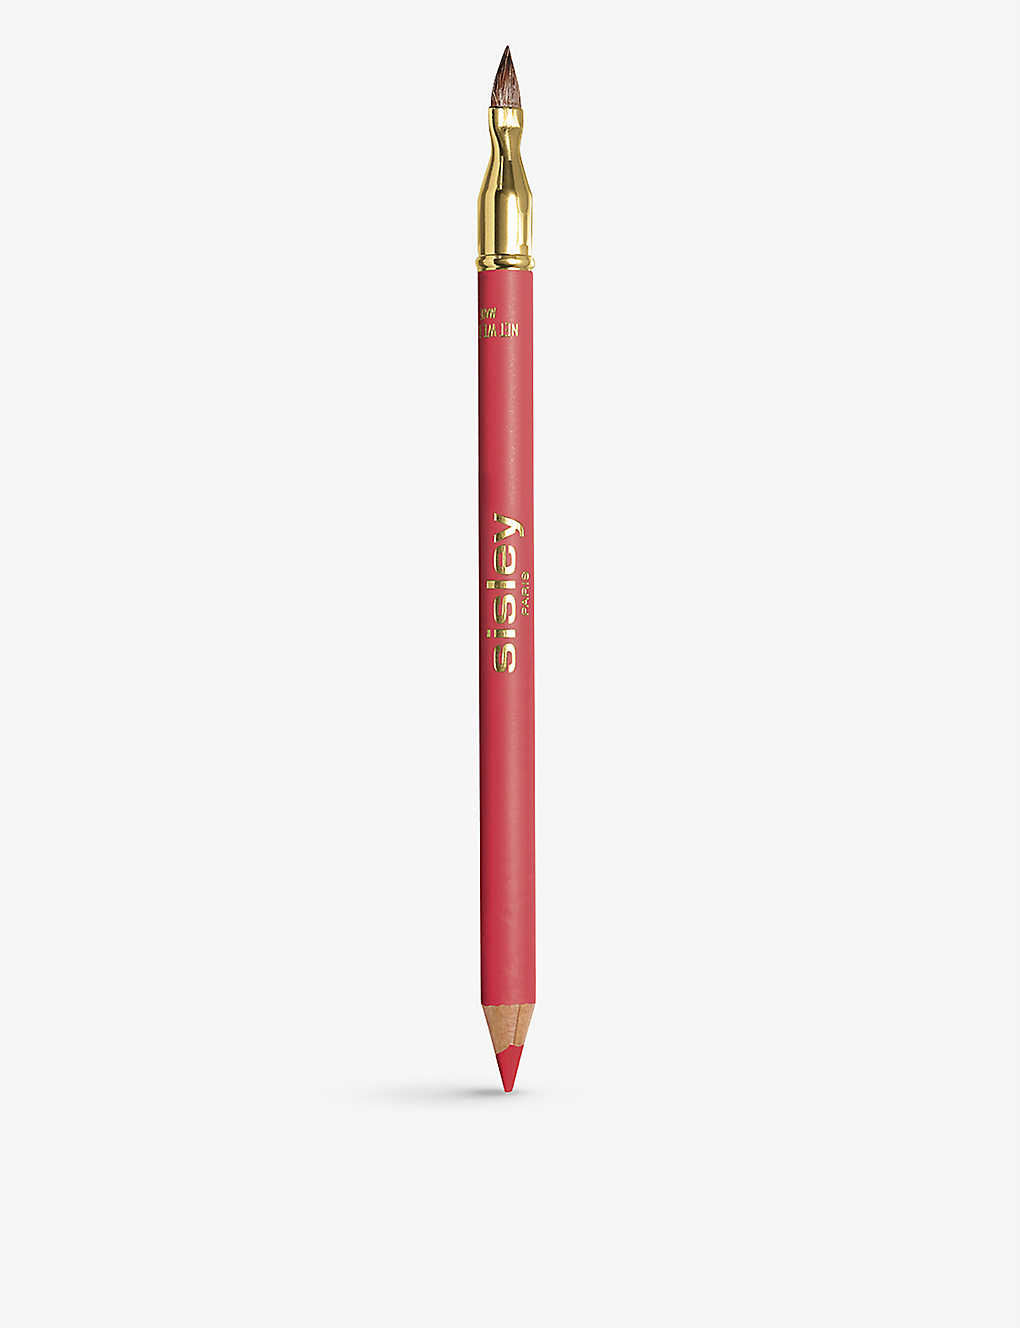 Sisley Paris Phyto-lèvres Perfect Lip Pencil 1.45g In 11 Sweet Coral